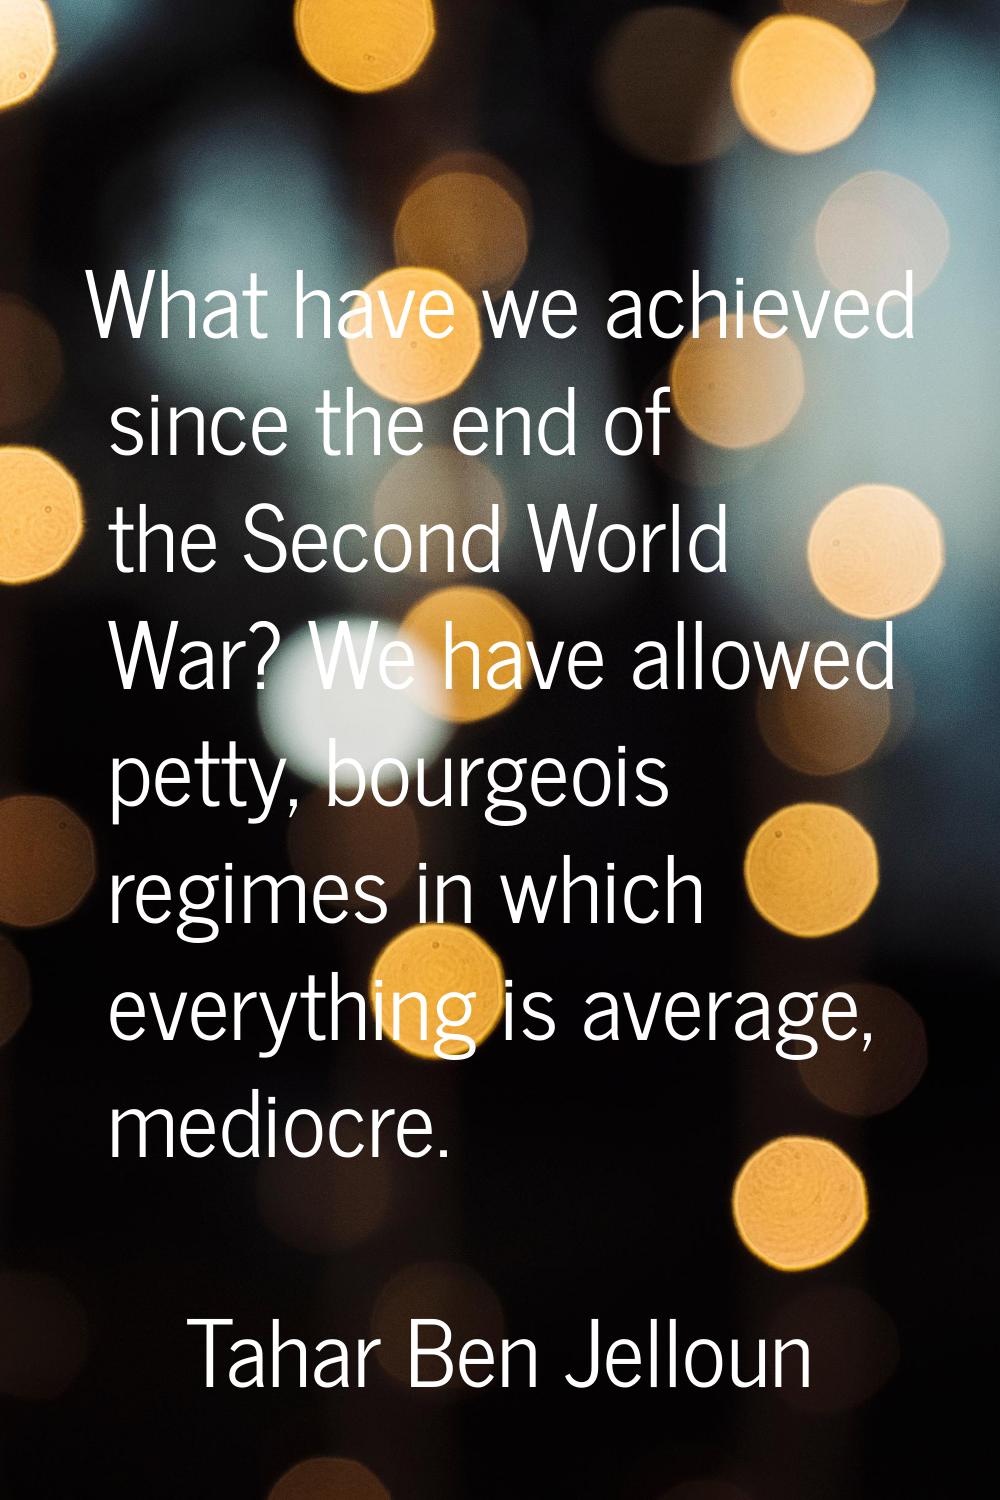 What have we achieved since the end of the Second World War? We have allowed petty, bourgeois regim